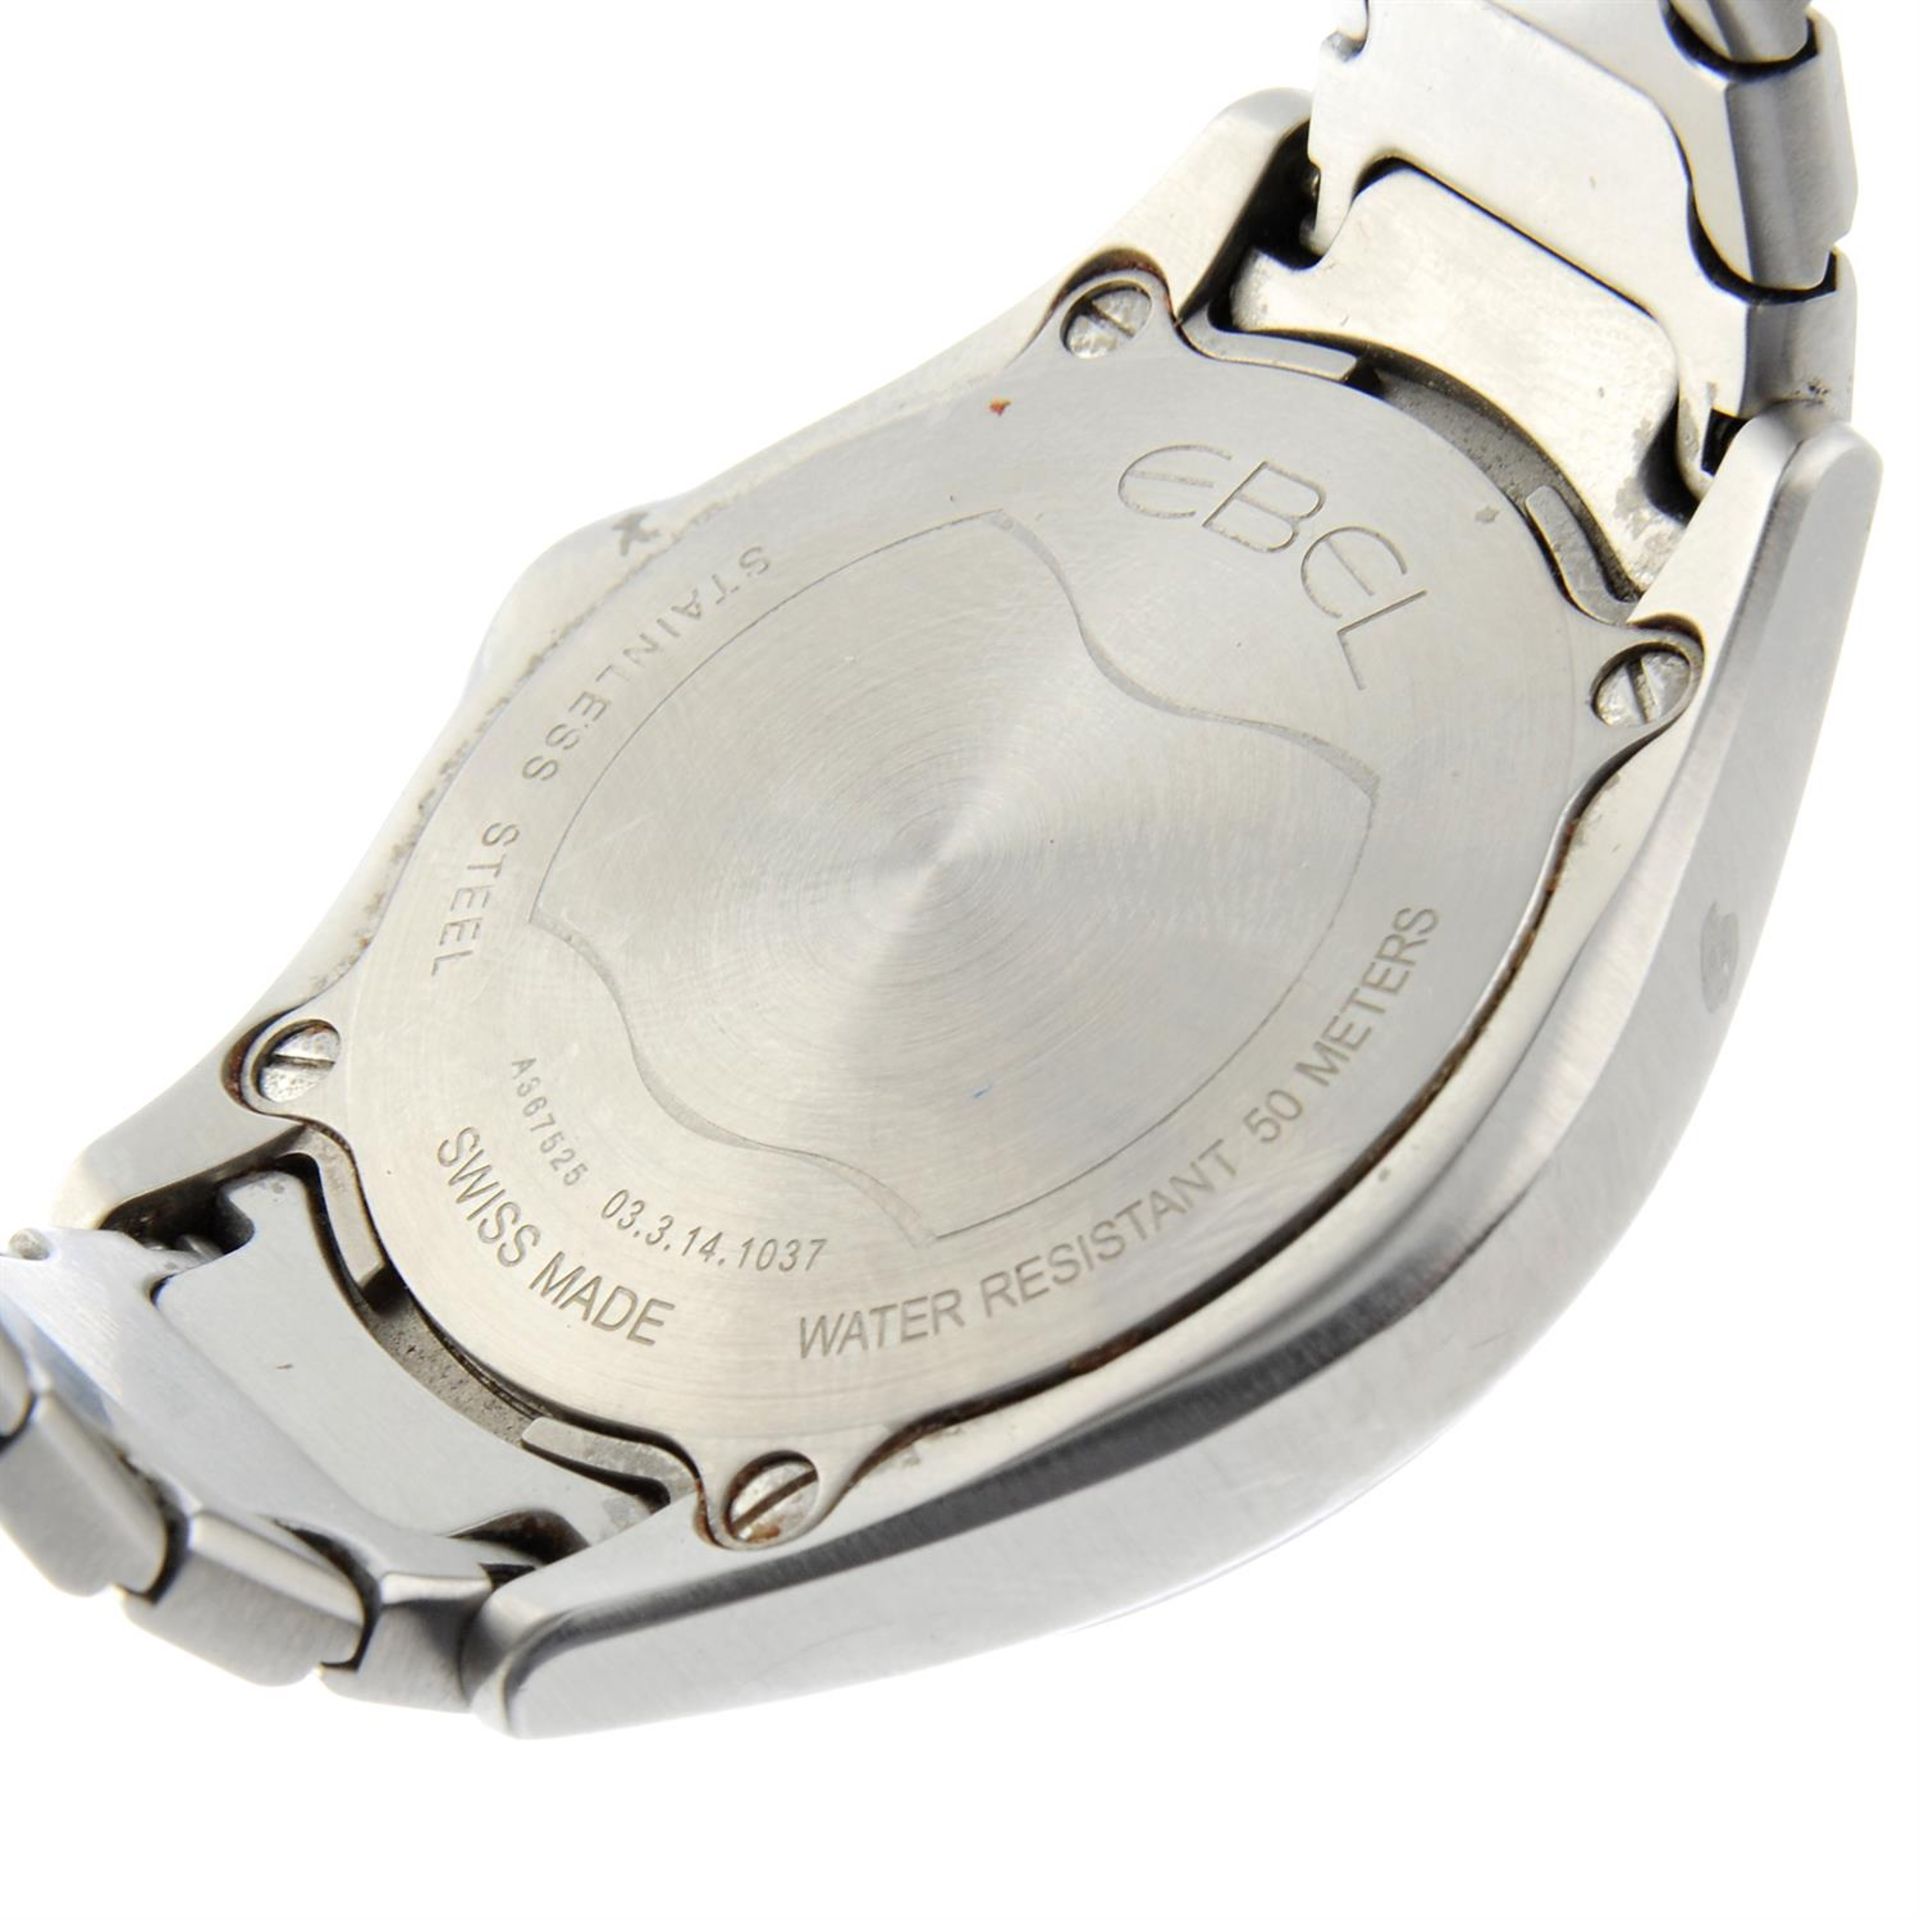 EBEL - a stainless steel Classic Sport bracelet watch, 42mm. - Image 4 of 4